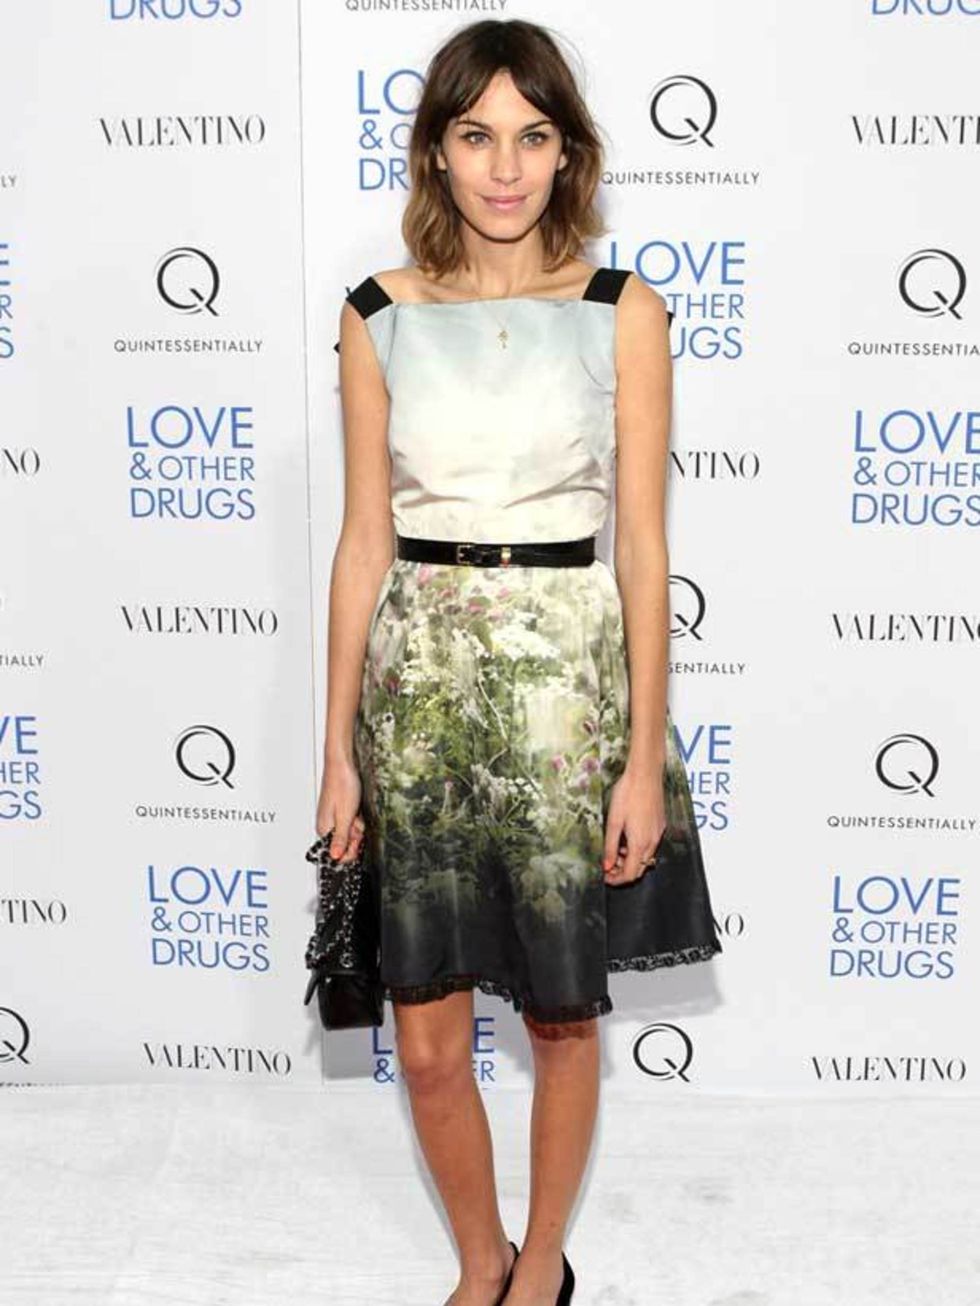 <p><a href="http://www.elleuk.com/starstyle/style-files/%28section%29/Alexa-Chung">Alexa Chung</a> wearing a <a href="http://www.elleuk.com/catwalk/collections/valentino/spring-summer-2011/collection">Valentino</a> dress from the 2011 resort collection </